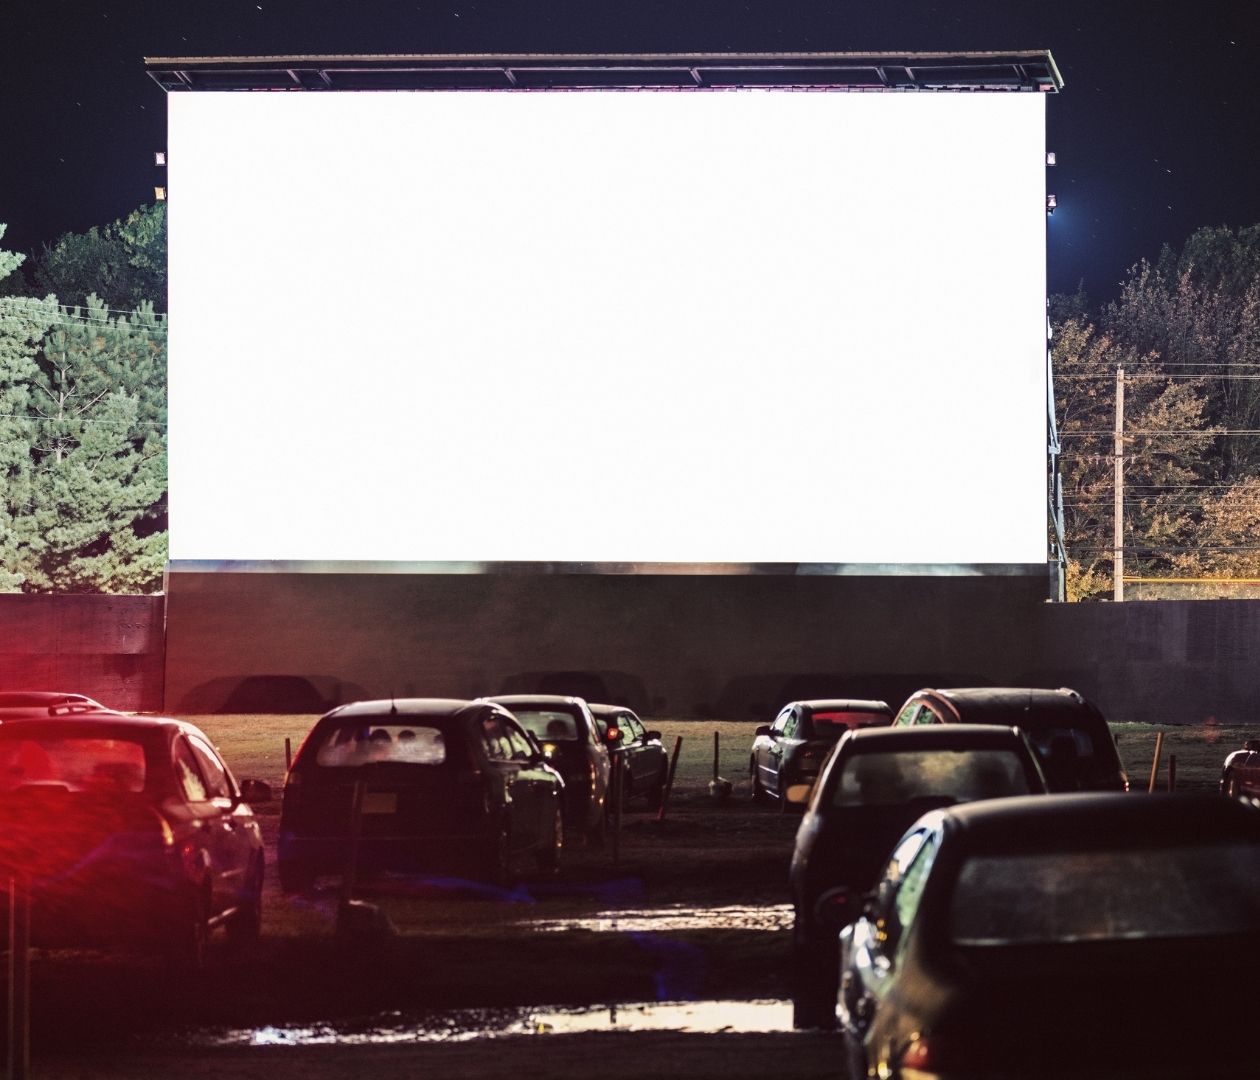 Drive in movie with cars parked in front of the screen